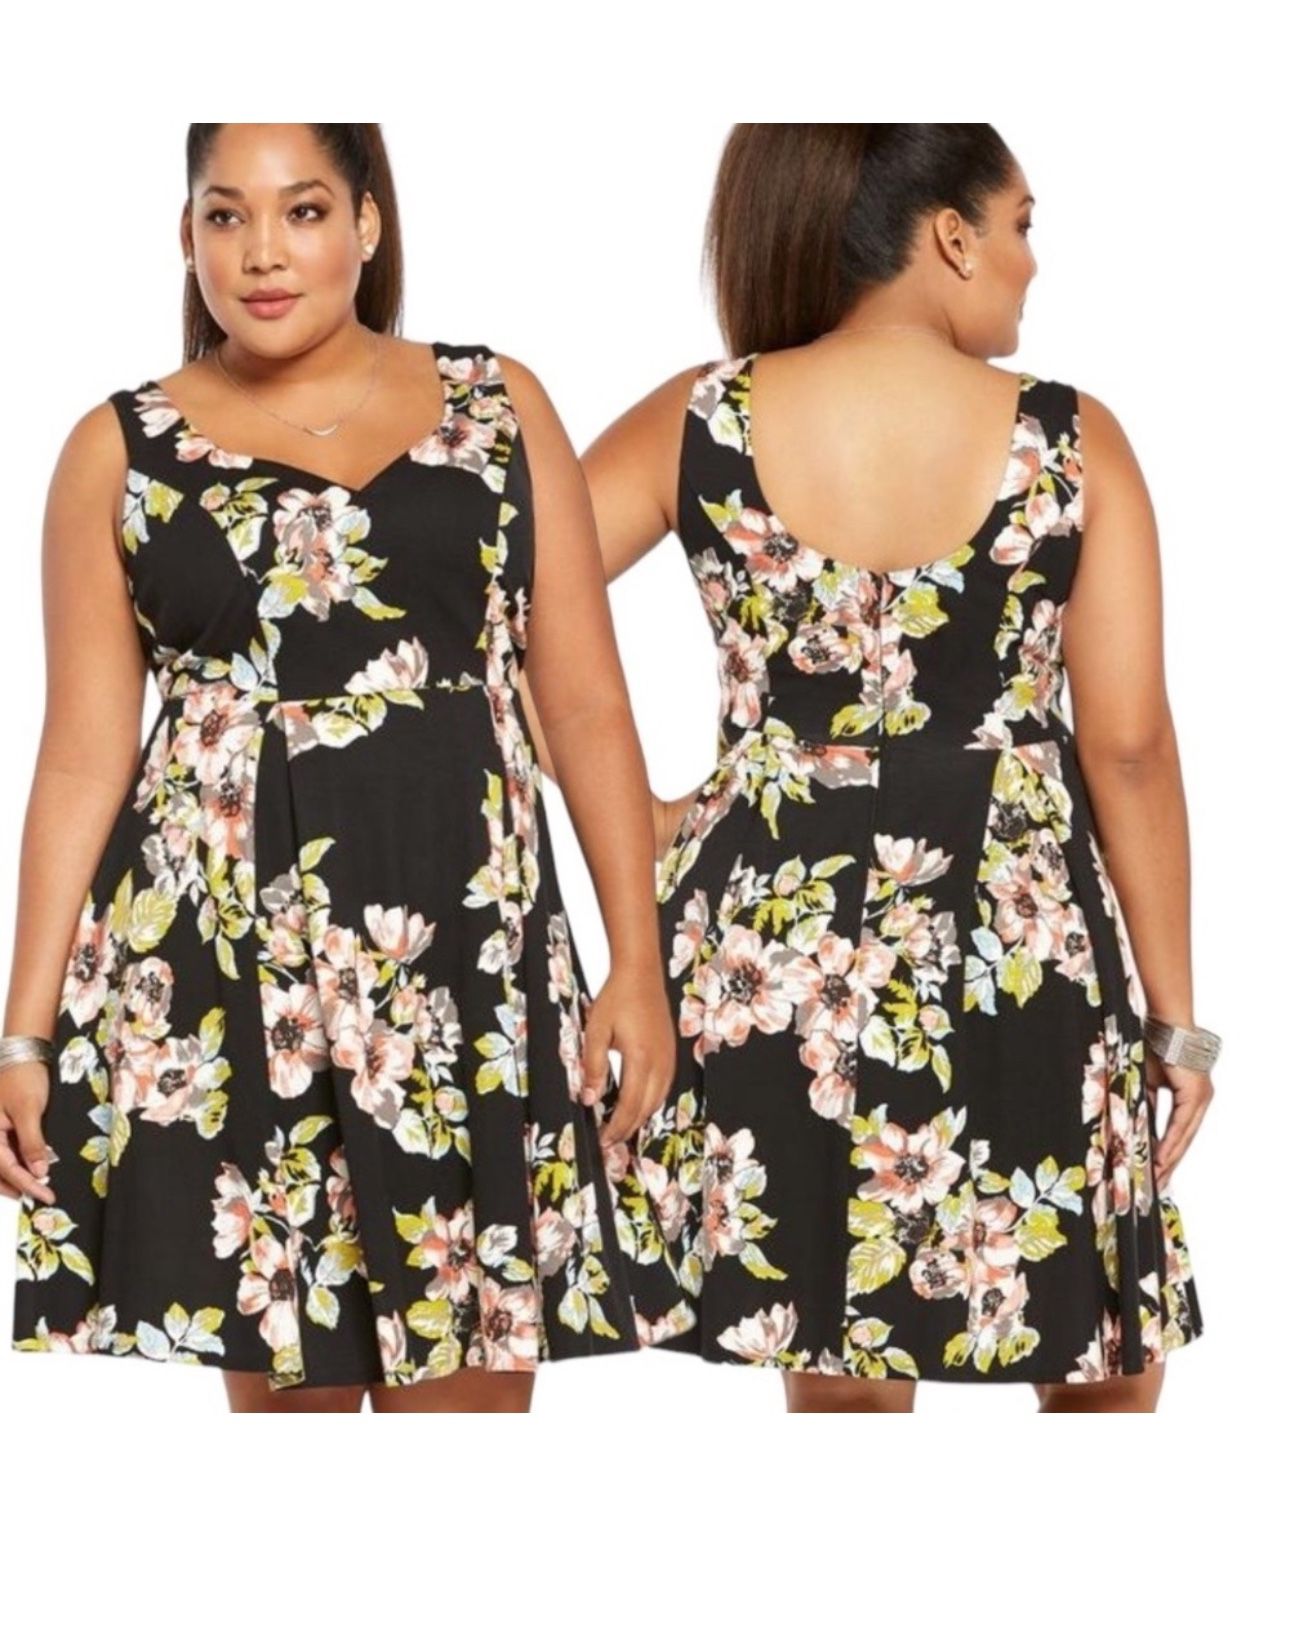 Torrid Floral Ponte skater dress size 16 pleated summer sleeveless Party